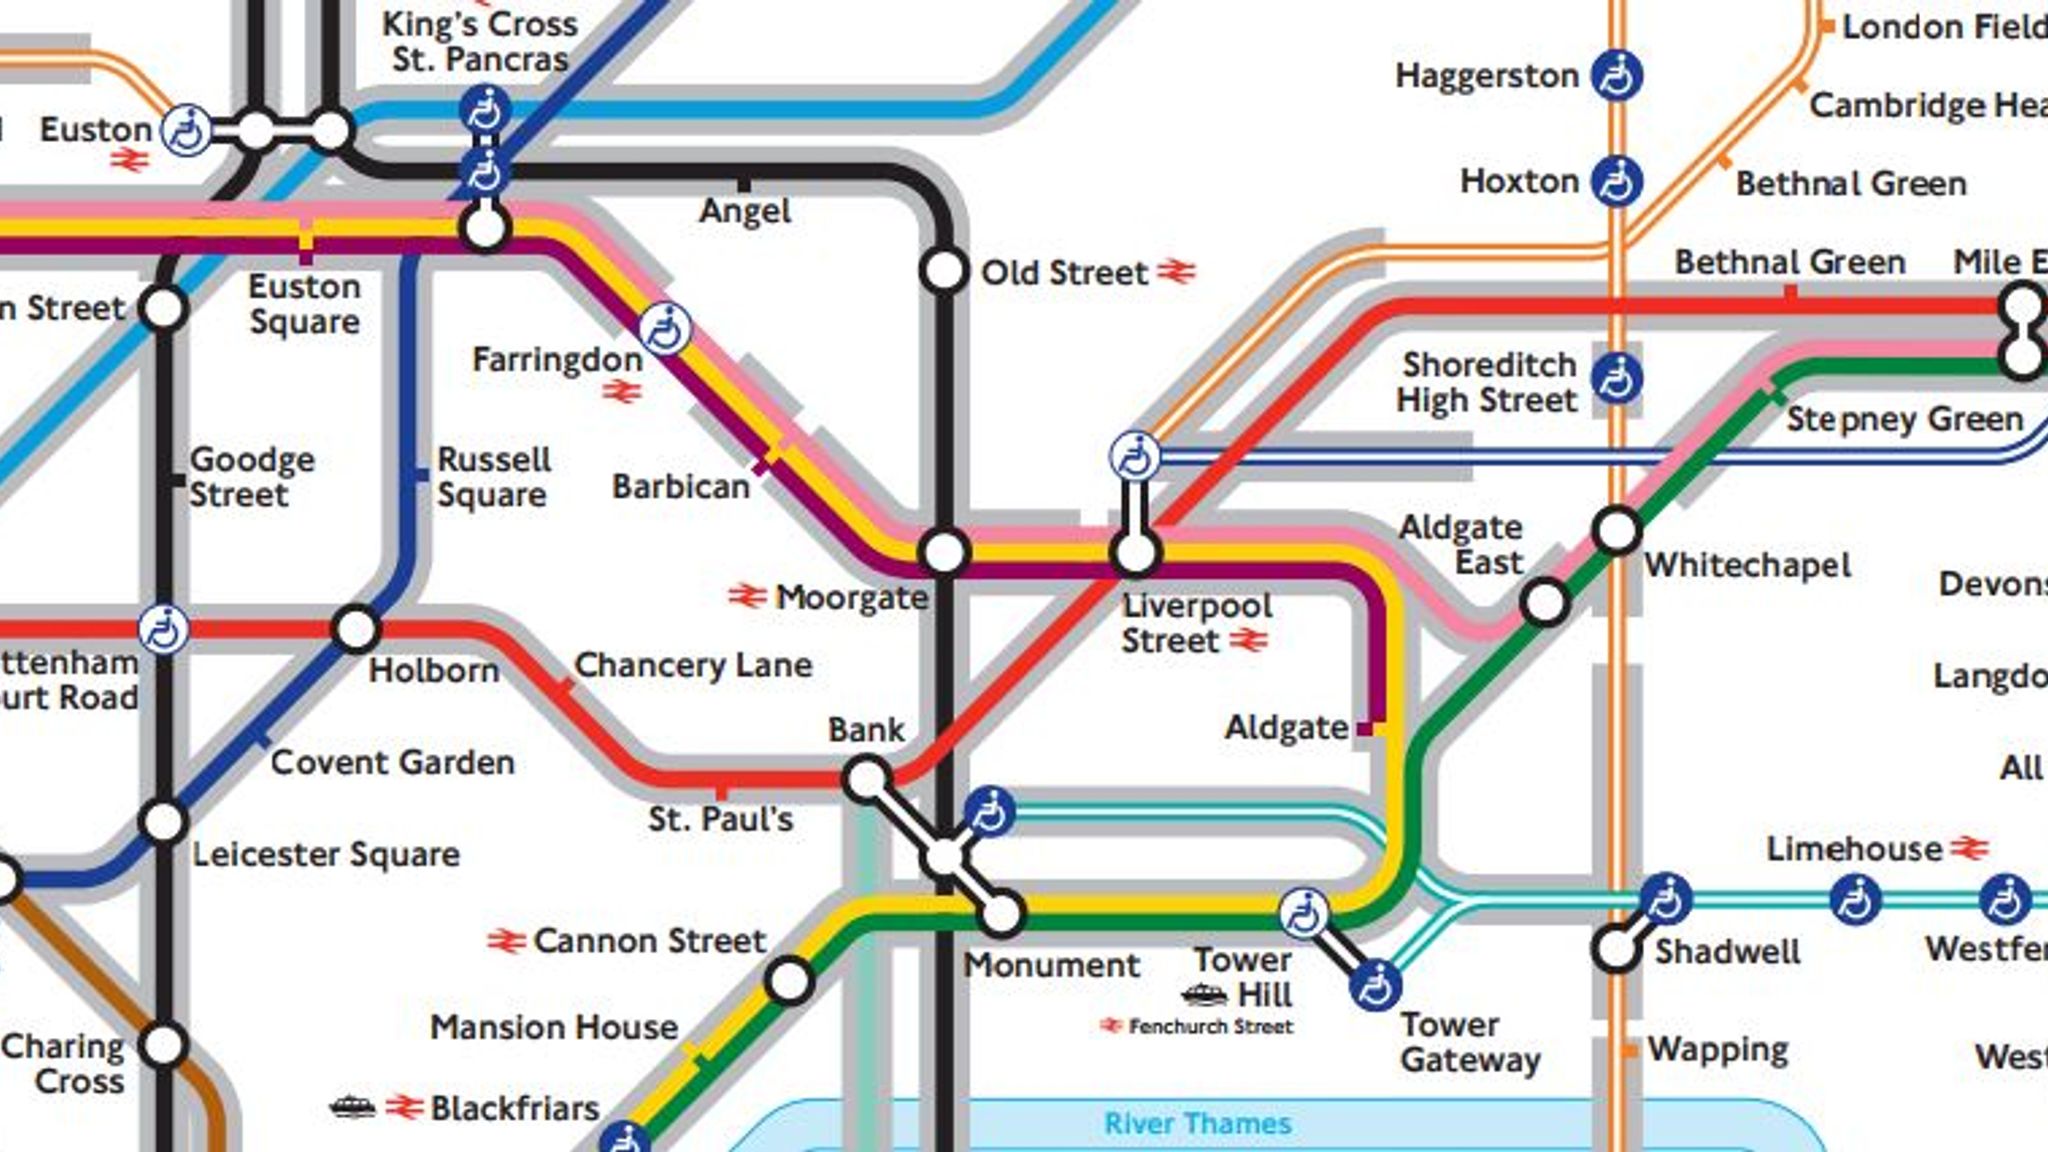 New Tube map helps anxious travellers avoid tunnels, UK News